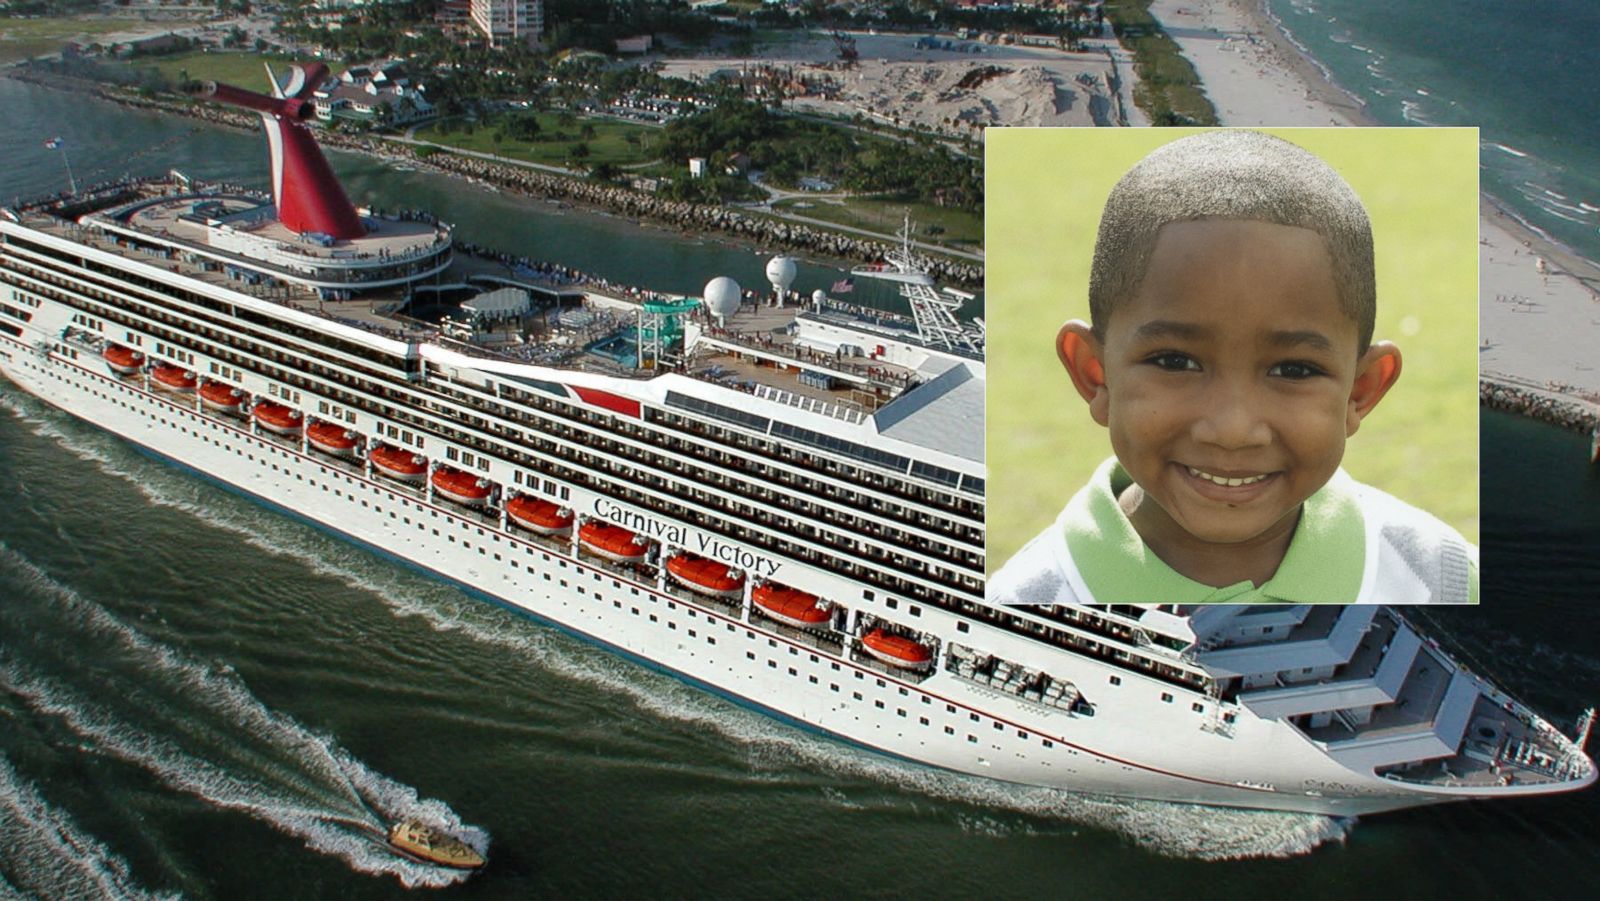 35+ Baby drowns on cruise ship ideas in 2021 